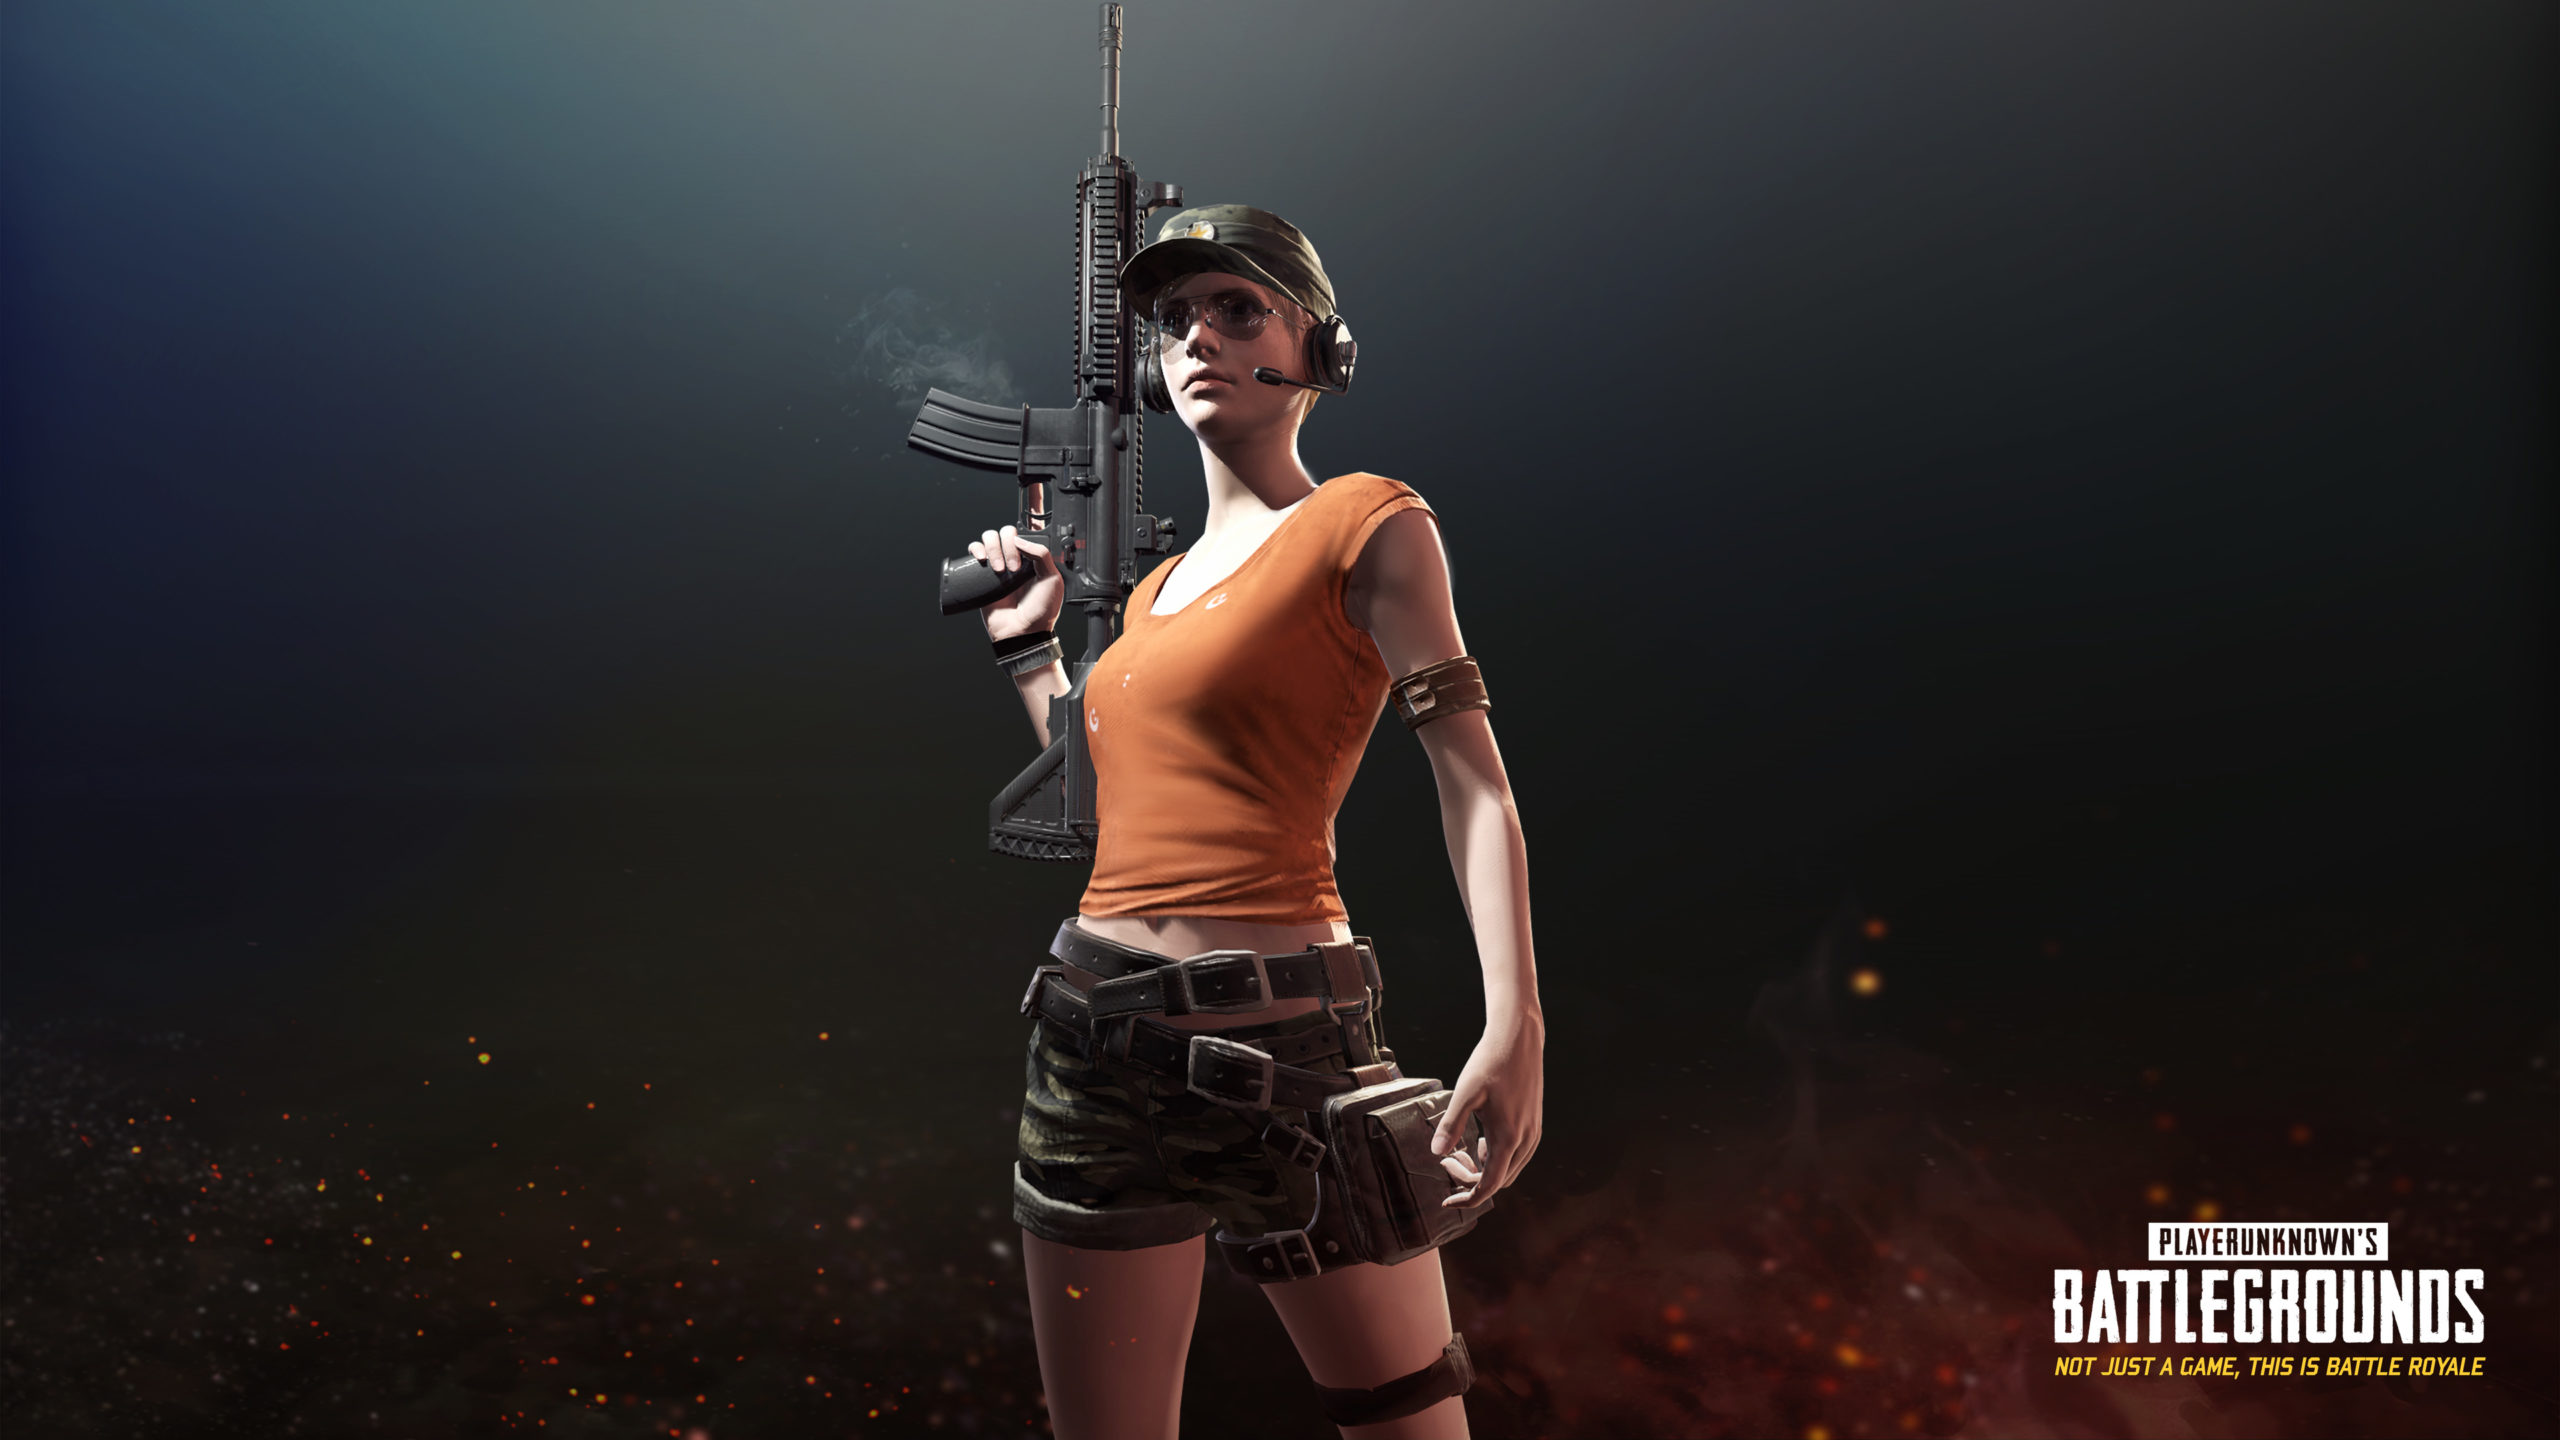 Battlegrounds’ New Skins Look Stylish, But They Will Cost You